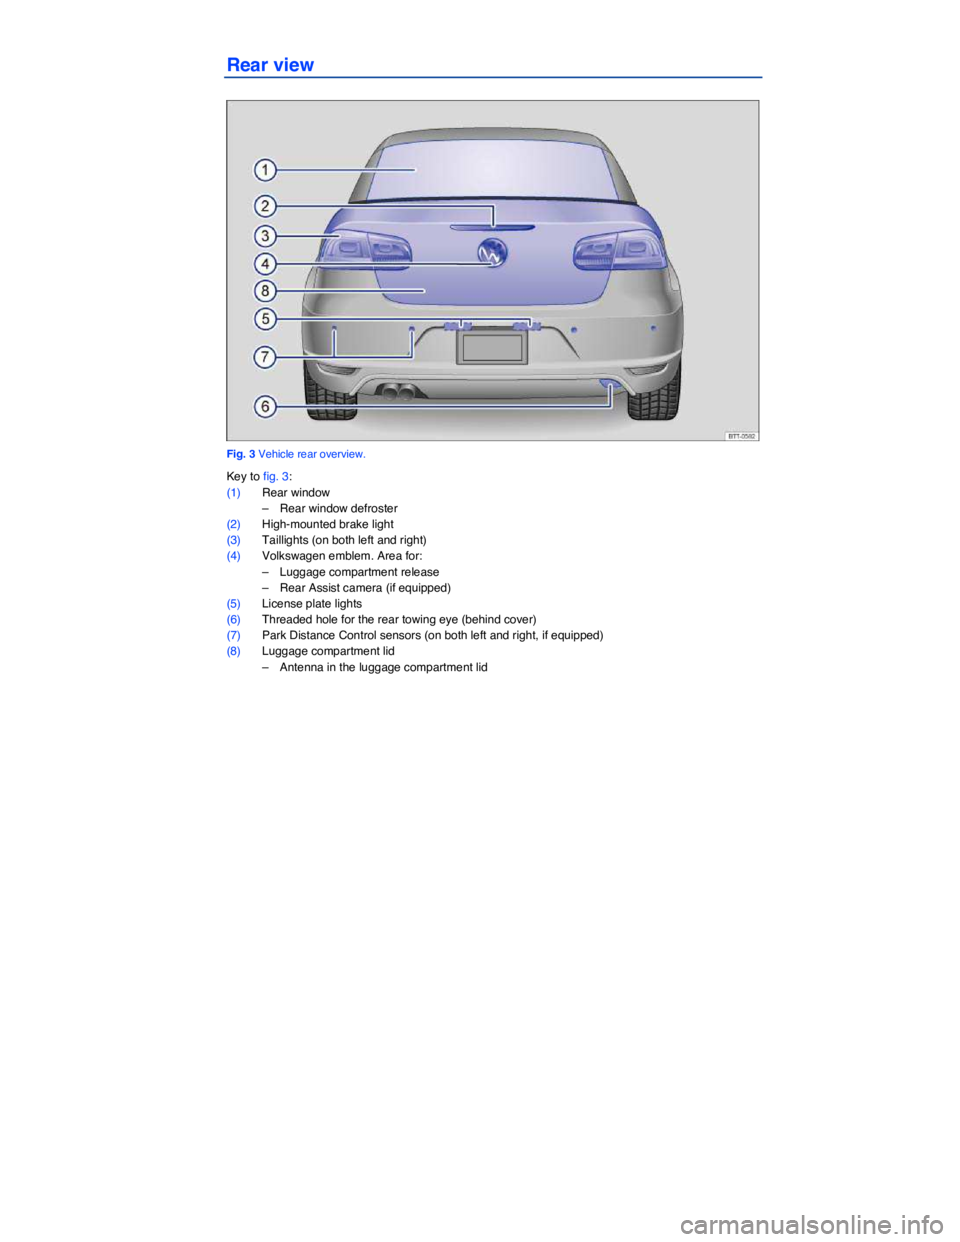 VOLKSWAGEN EOS 2011  Owners Manual  
 
Rear view 
 
Fig. 3 Vehicle rear overview. 
Key to fig. 3: 
(1) Rear window 
–  Rear window defroster  
(2) High-mounted brake light 
(3) Taillights (on both left and right)  
(4) Volkswagen emb